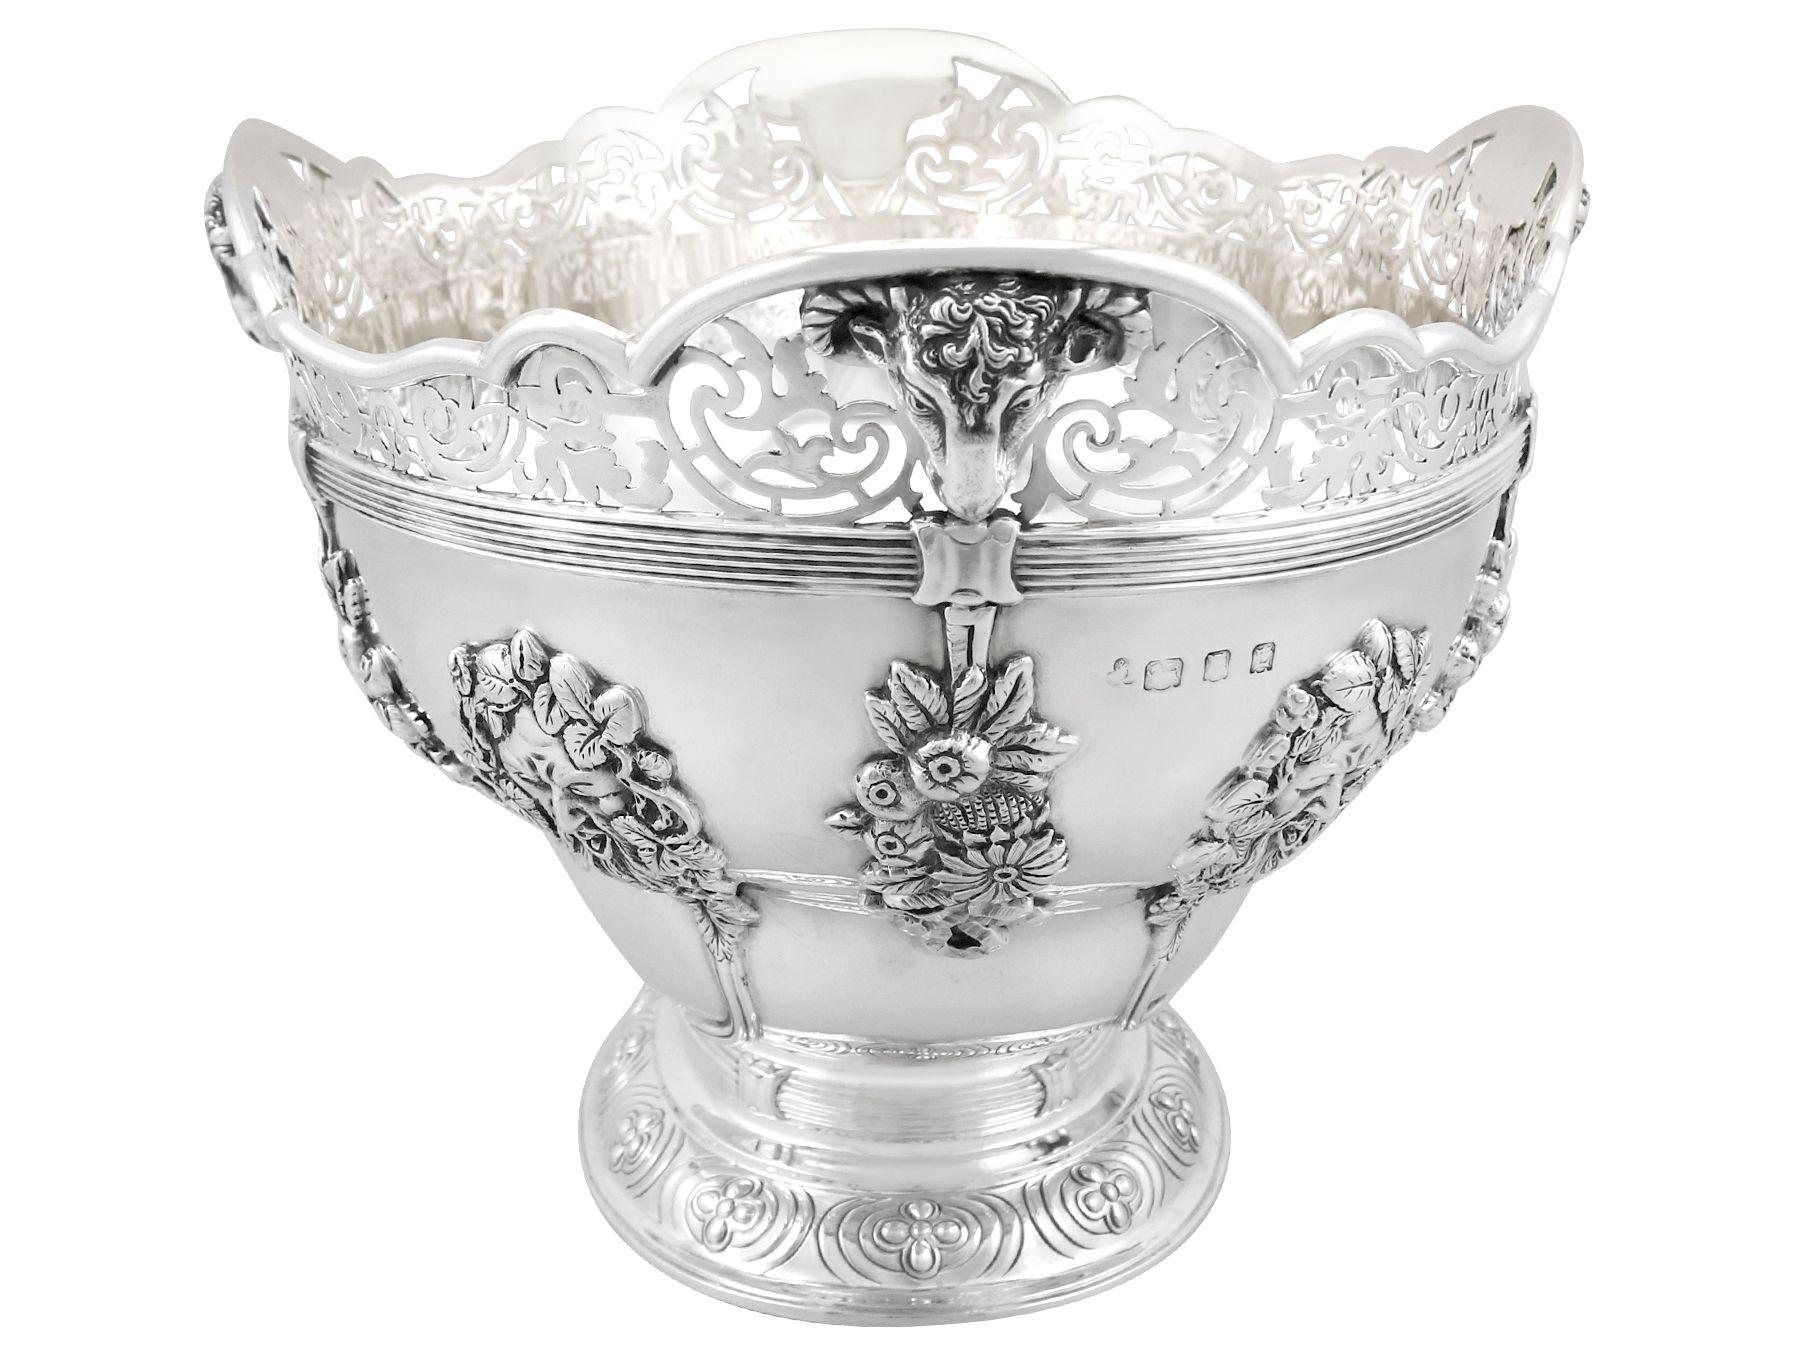 Wakely & Wheeler Antique Sterling Silver Presentation Bowl In Excellent Condition For Sale In Jesmond, Newcastle Upon Tyne